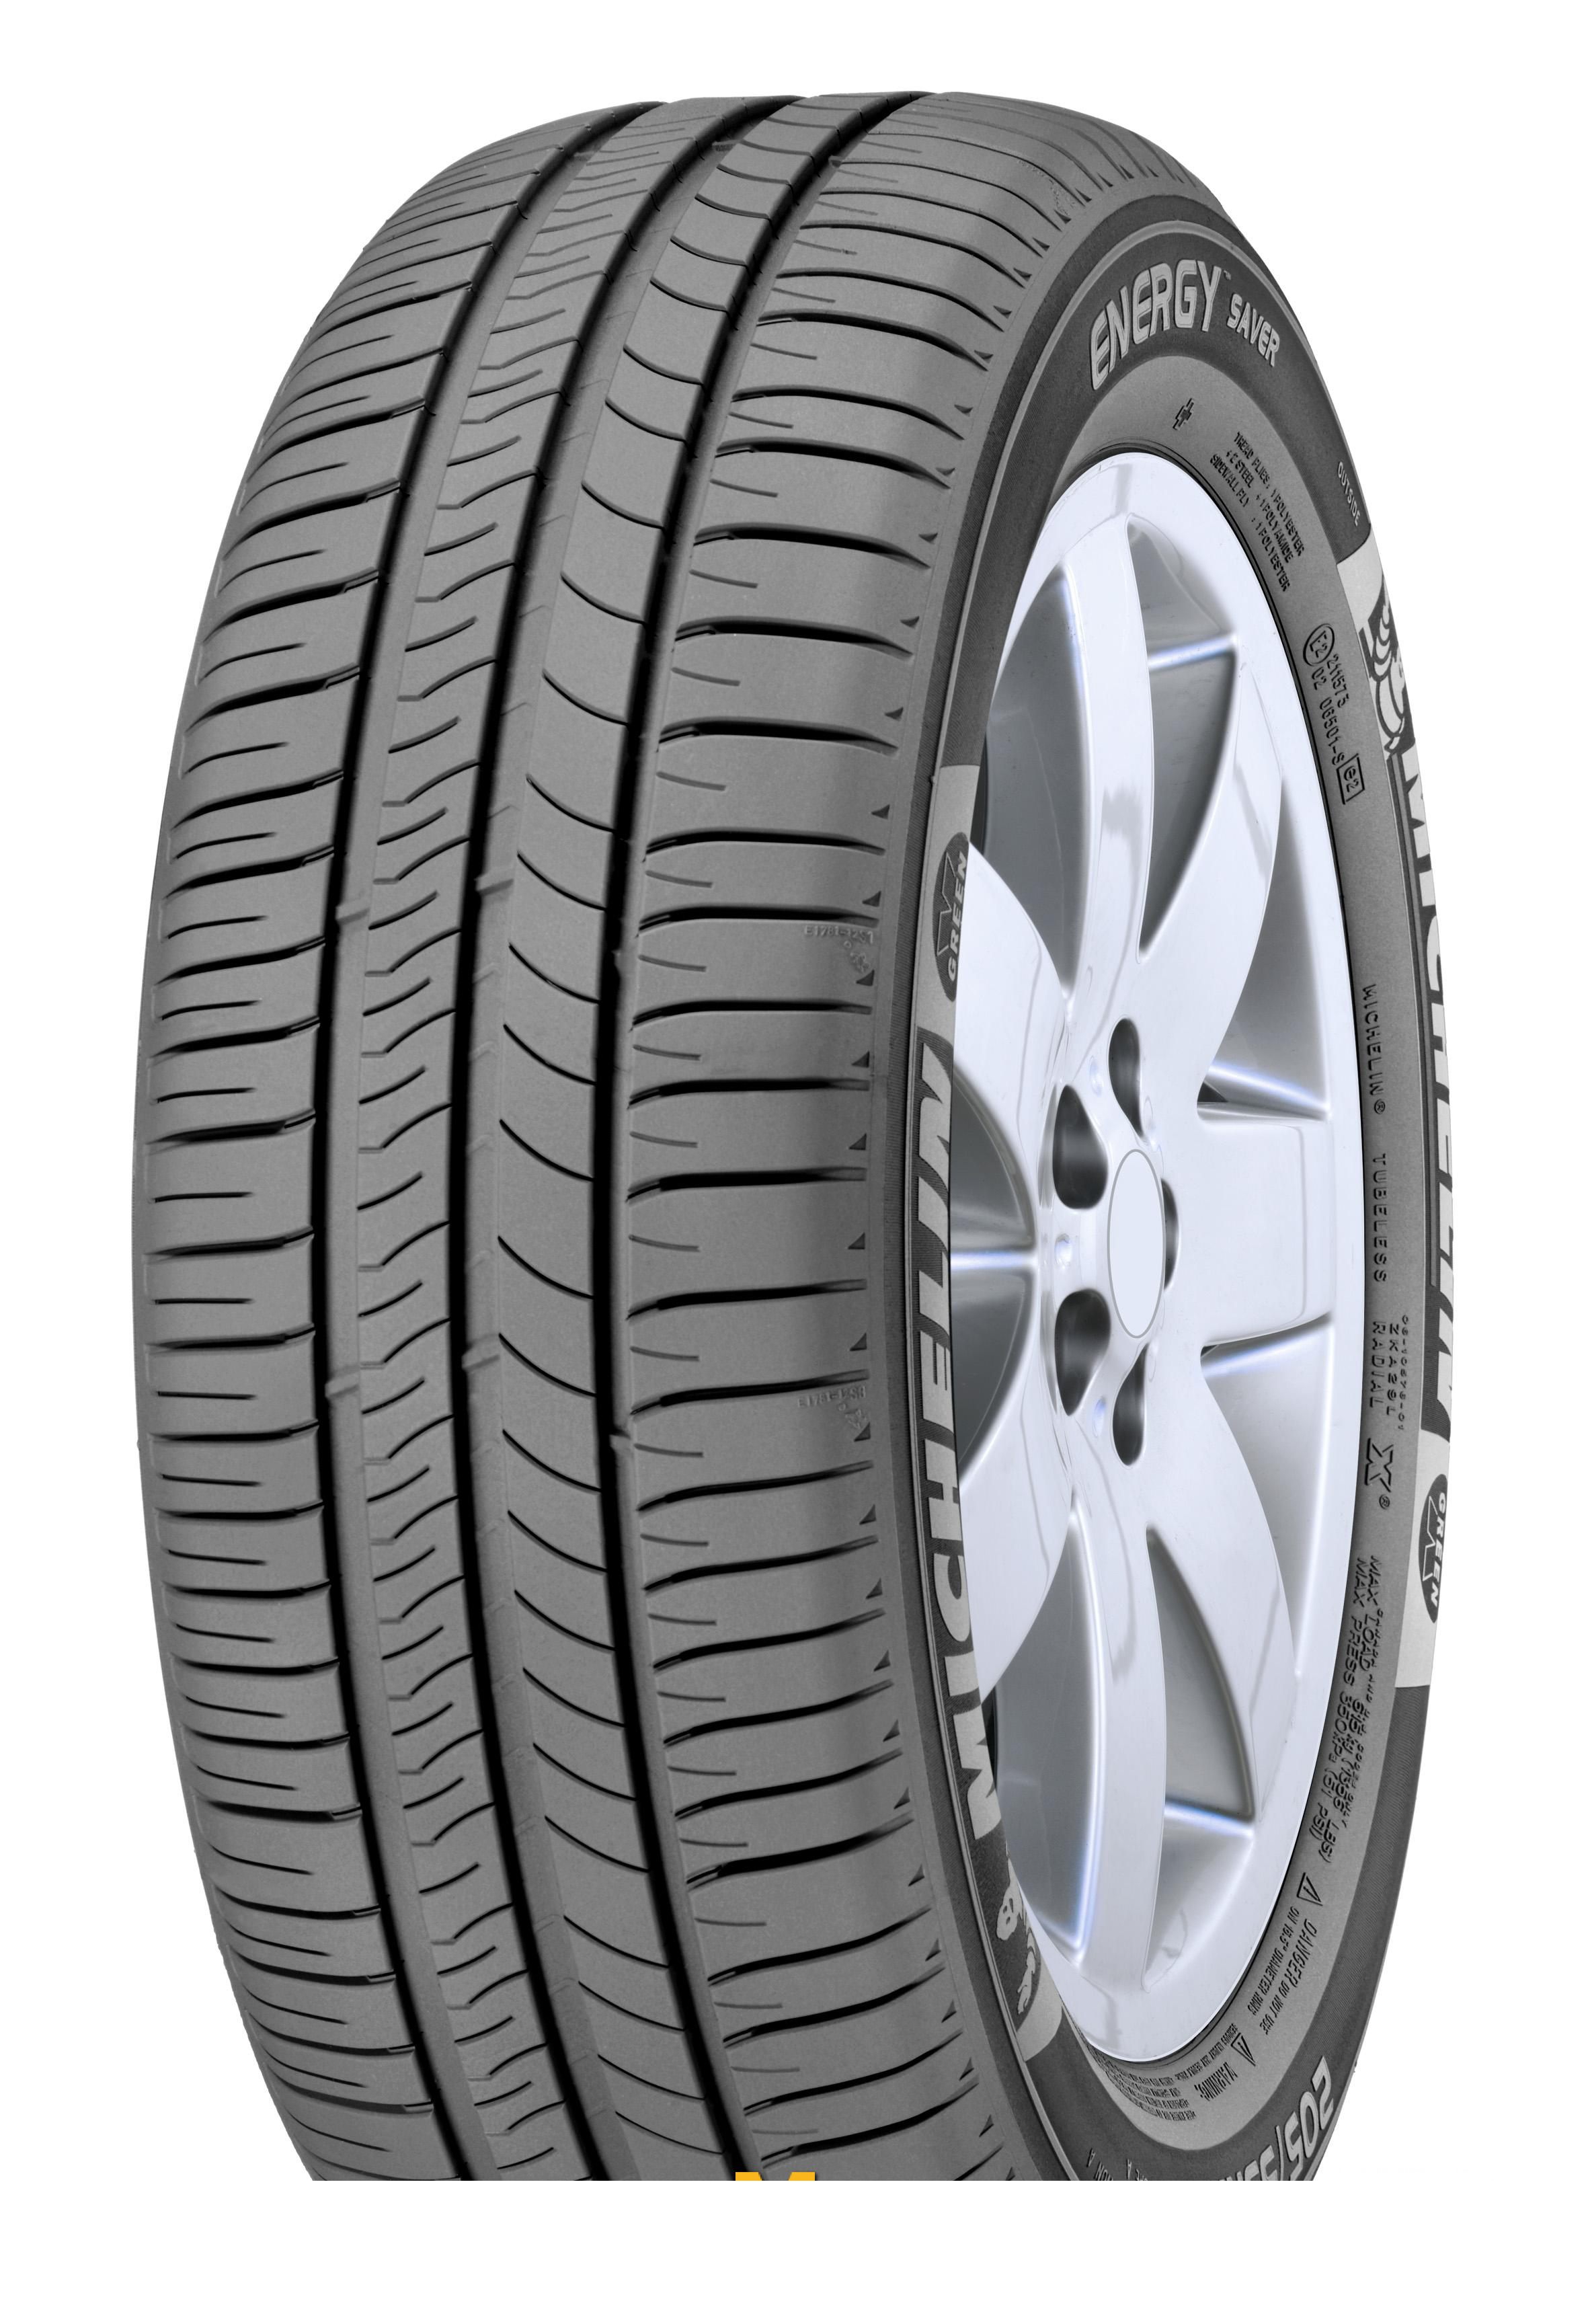 Tire Michelin Energy Saver+ 205/60R16 96H - picture, photo, image